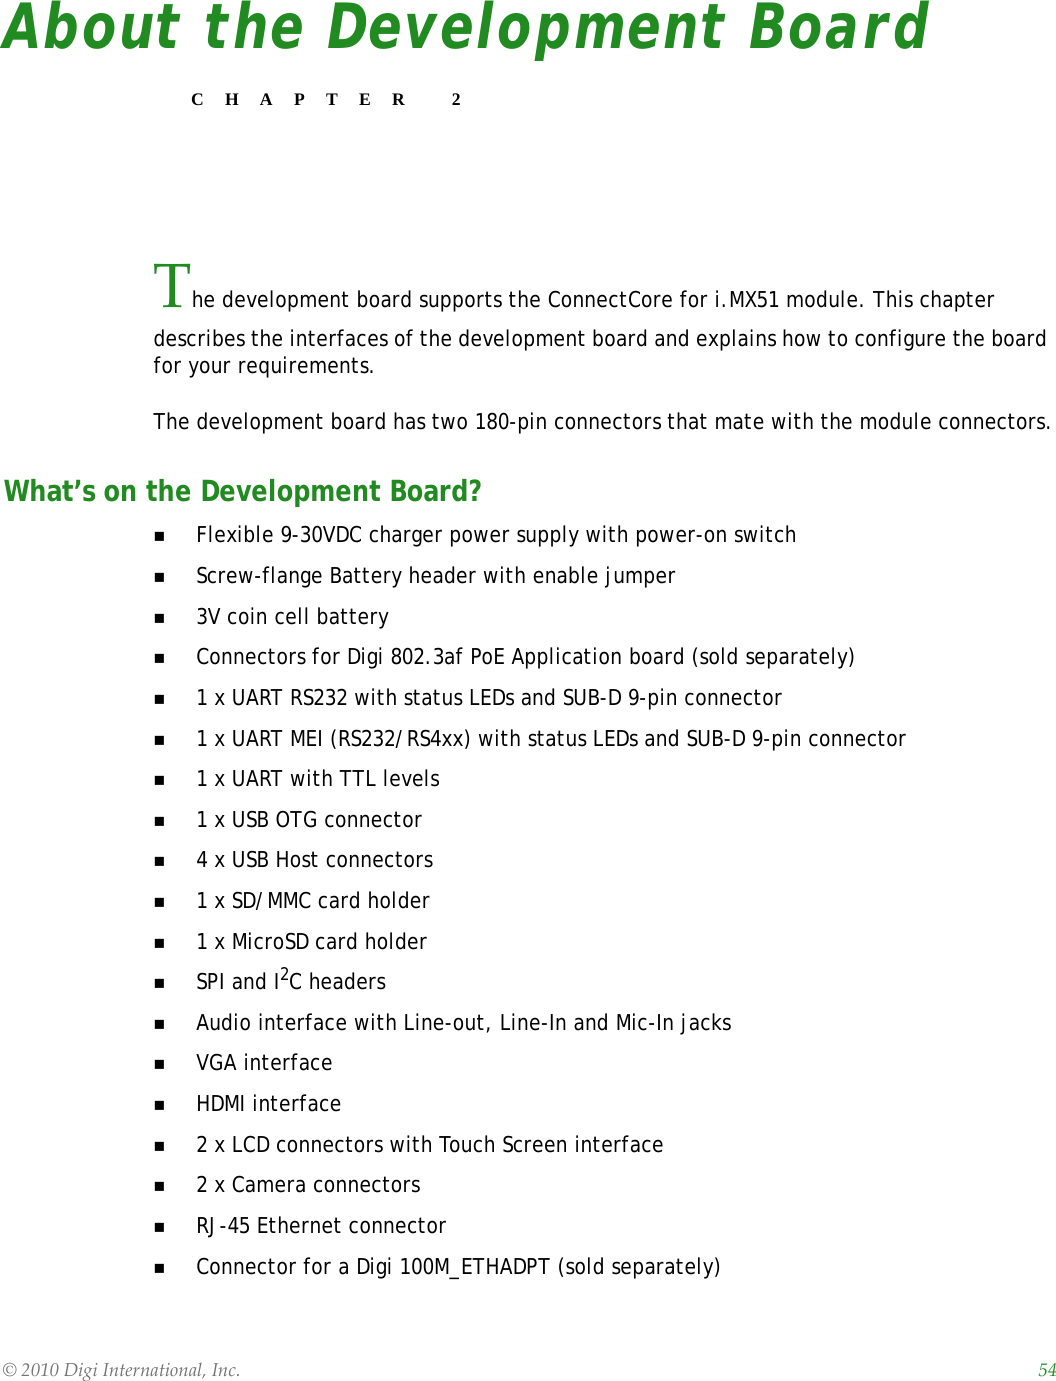 ©2010DigiInternational,Inc. 54About the Development BoardCHAPTER 2The development board supports the ConnectCore for i.MX51 module. This chapter describes the interfaces of the development board and explains how to configure the board for your requirements. The development board has two 180-pin connectors that mate with the module connectors.What’s on the Development Board?Flexible 9-30VDC charger power supply with power-on switchScrew-flange Battery header with enable jumper3V coin cell batteryConnectors for Digi 802.3af PoE Application board (sold separately)1 x UART RS232 with status LEDs and SUB-D 9-pin connector1 x UART MEI (RS232/RS4xx) with status LEDs and SUB-D 9-pin connector1 x UART with TTL levels1 x USB OTG connector4 x USB Host connectors1 x SD/MMC card holder1 x MicroSD card holderSPI and I2C headersAudio interface with Line-out, Line-In and Mic-In jacksVGA interfaceHDMI interface2 x LCD connectors with Touch Screen interface2 x Camera connectorsRJ-45 Ethernet connectorConnector for a Digi 100M_ETHADPT (sold separately)